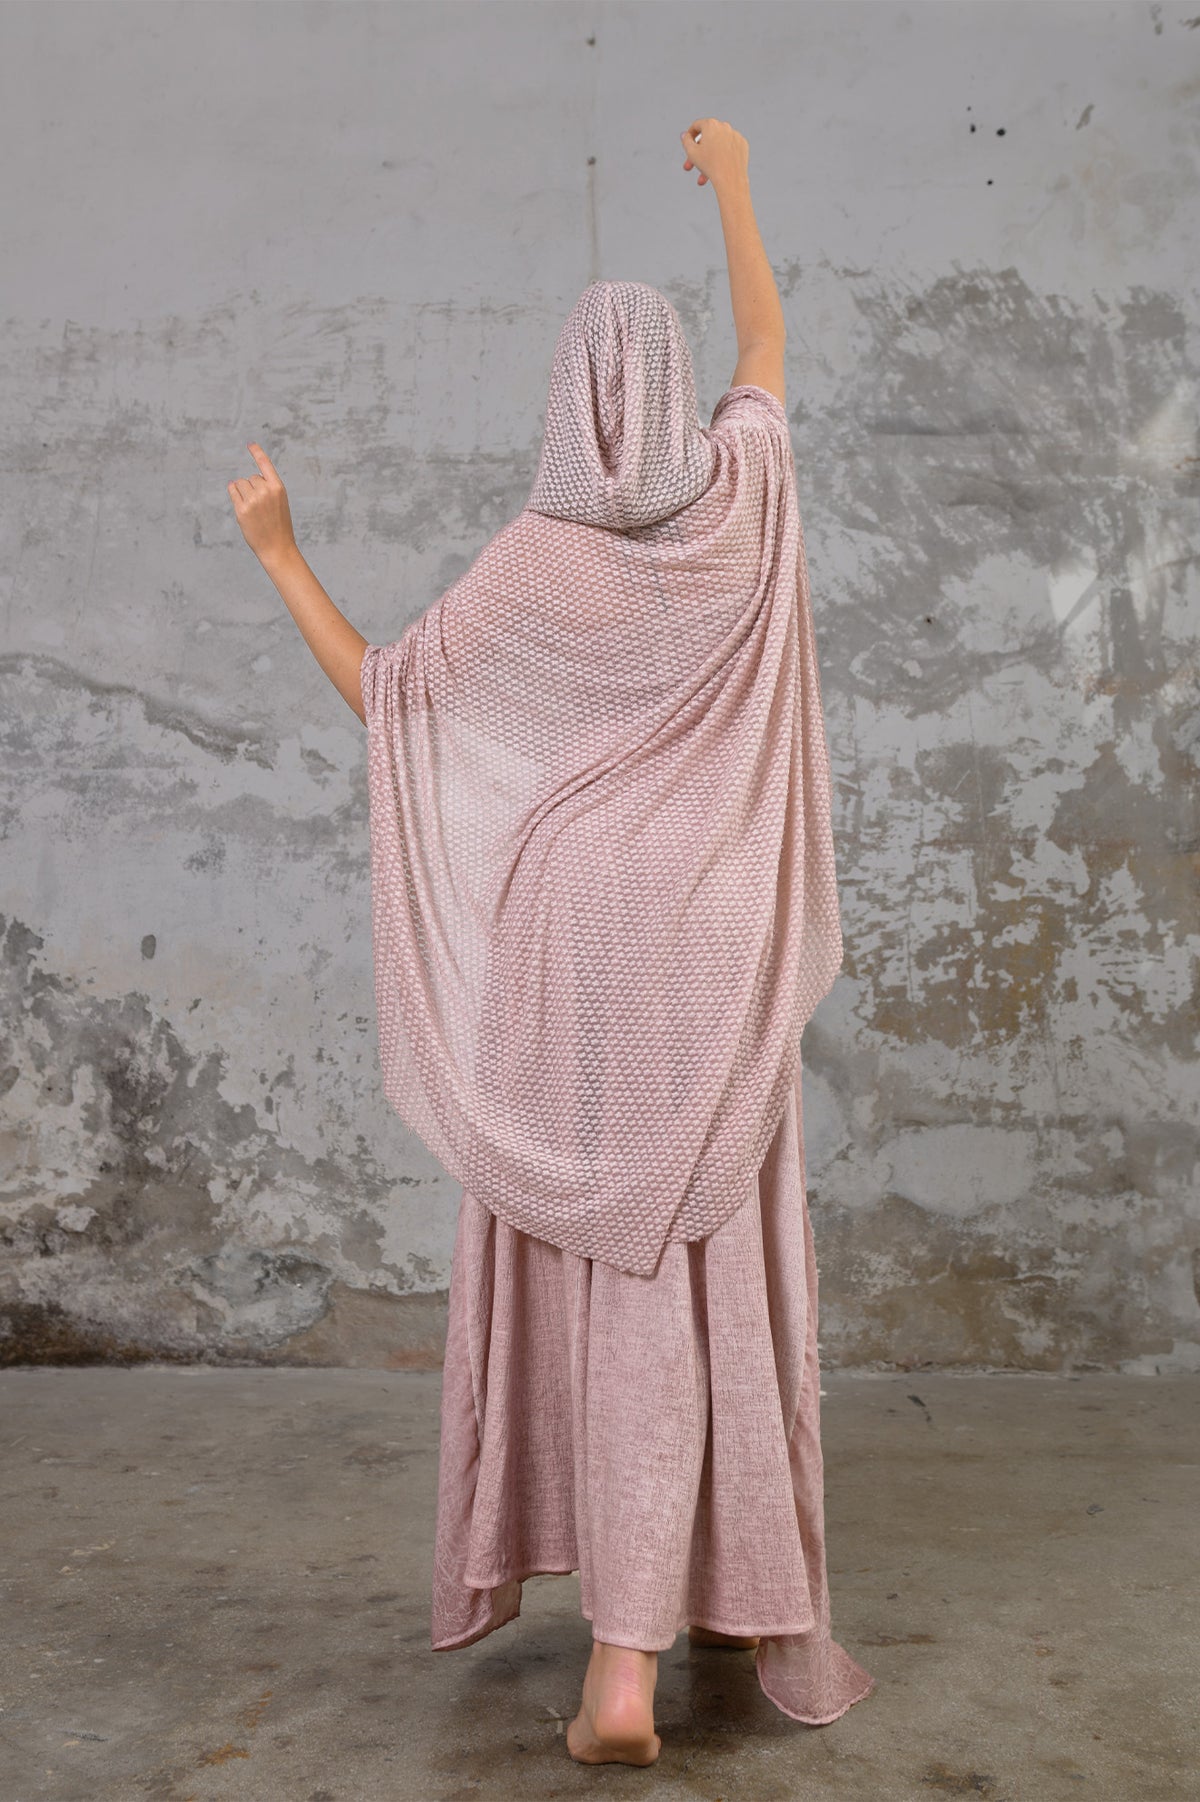 Pink Bohemian poncho hooded shawl, Ethnic print women's poncho, Spiritual clothing accessory, Handmade boho chic poncho, Flowy and comfortable poncho for women, Layering piece for chilly evenings, Statement piece for festivals and events, Unique and intricate design, Vibrant and earthy colors, Perfect for yoga and meditation practices.